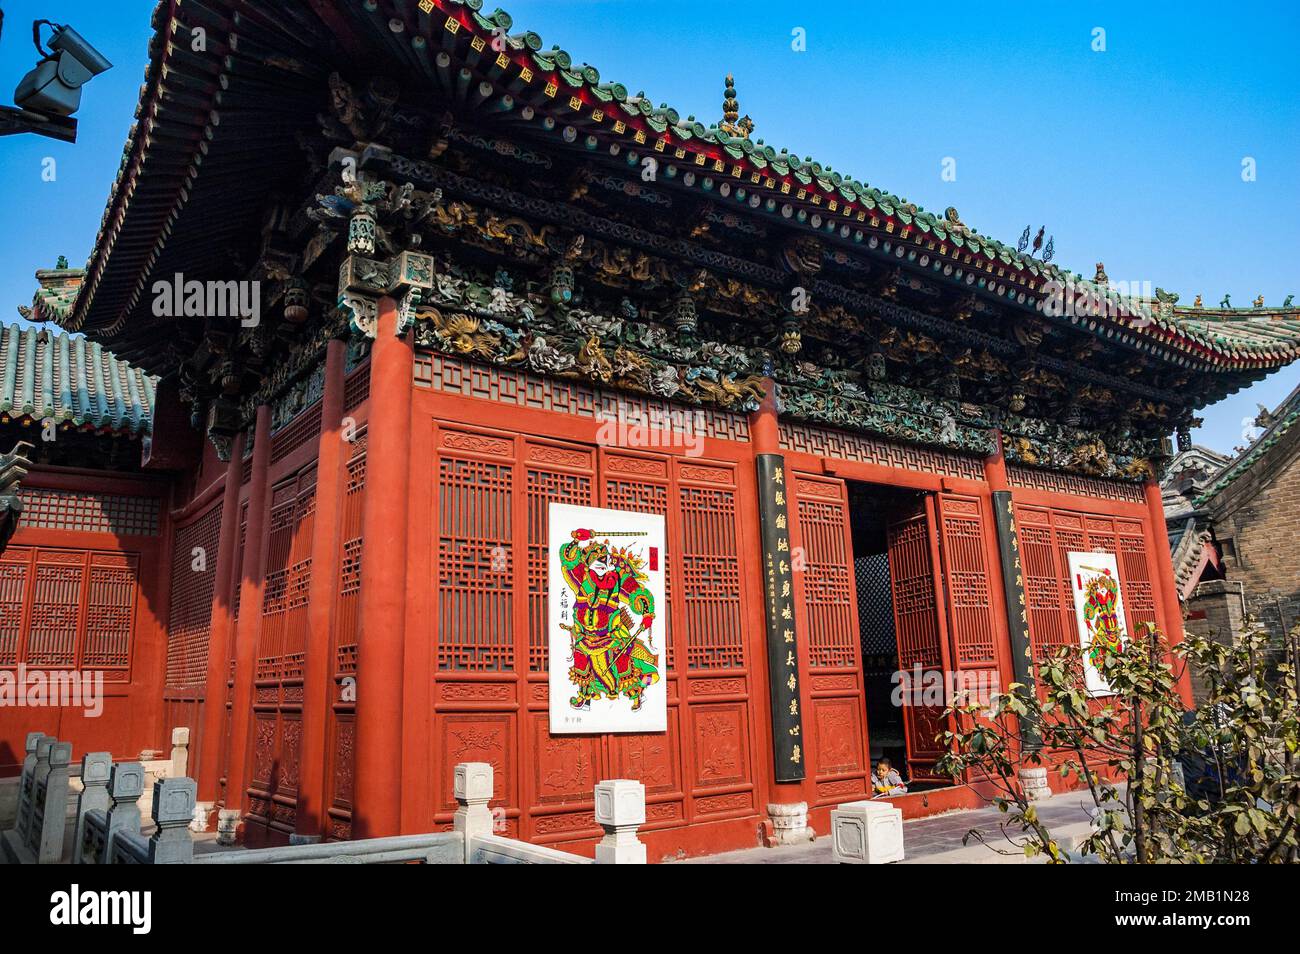 Traditional architecture building at the Shanshangan guild hall in Kaifeng. Kaifeng was the capital of the Northern Song Dynasty. Henan Province, Chin Stock Photo